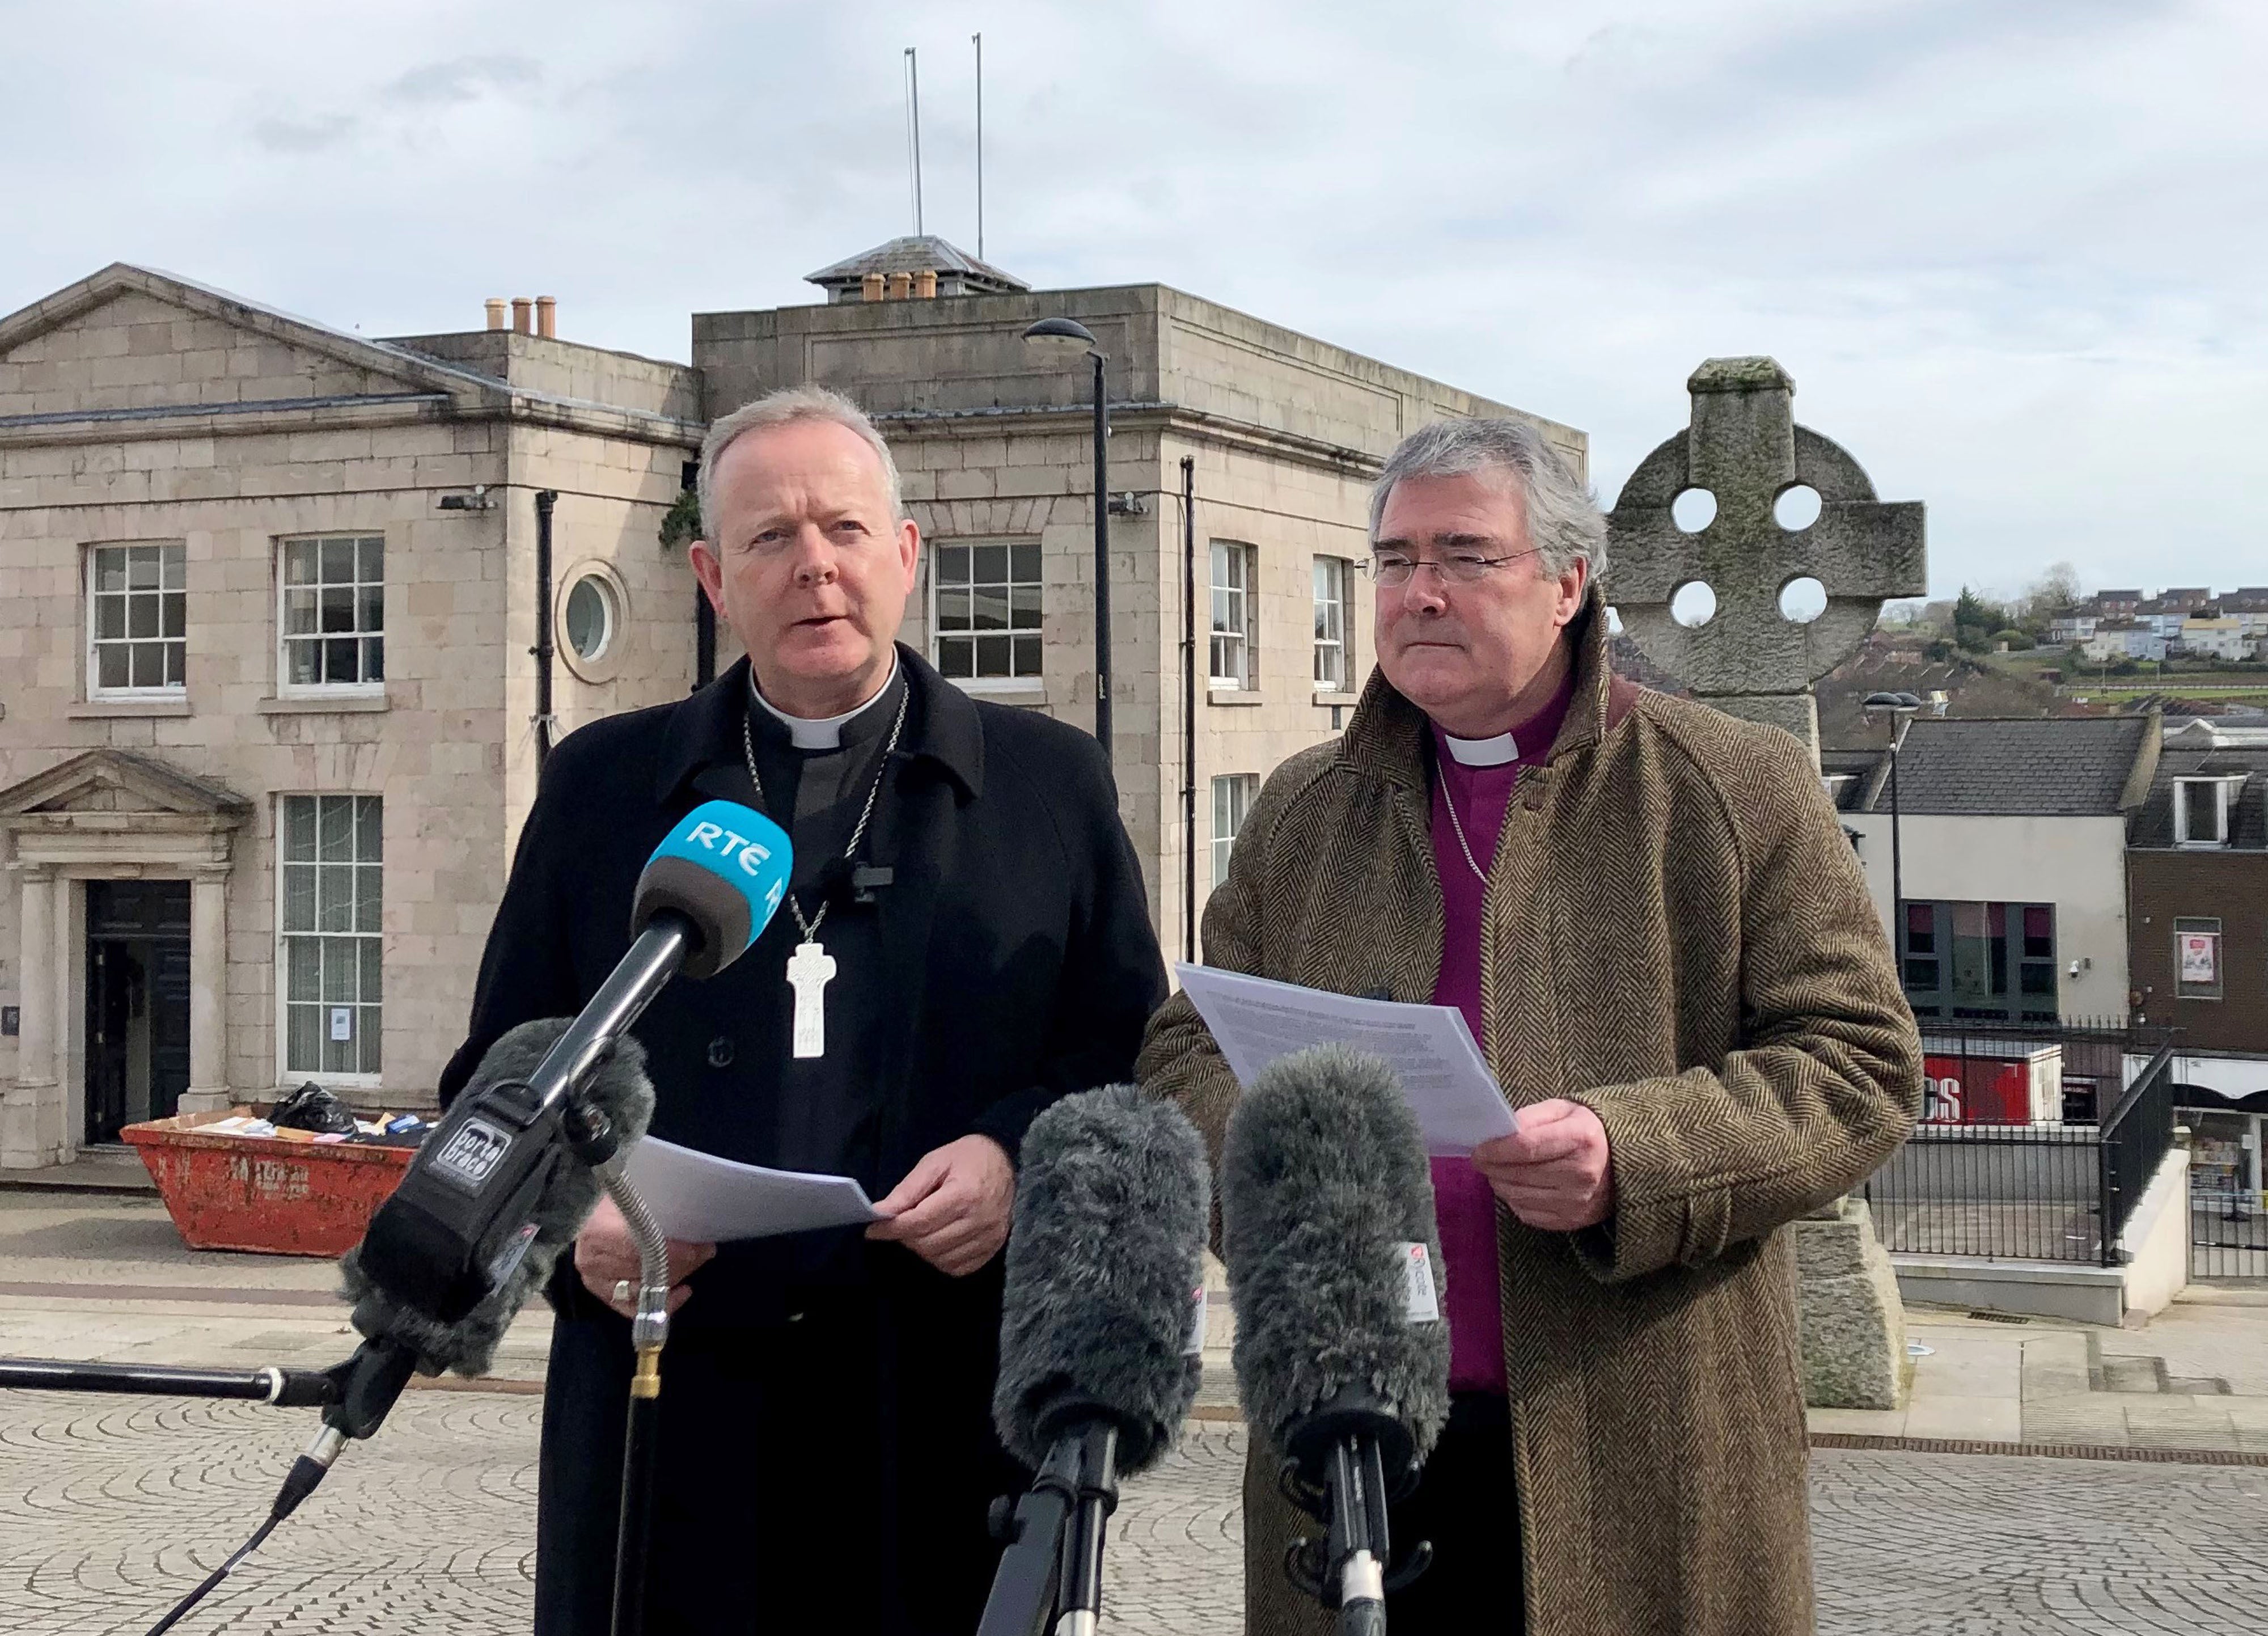 Catholic Primate of All Ireland Archbishop Eamon Martin (left) and the Church of Ireland Primate of All Ireland, Archbishop John McDowell speaking to the media in Armagh on the war in Ukraine and the response to the refugee crisis. Picture date: Wednesday March 16, 2022.